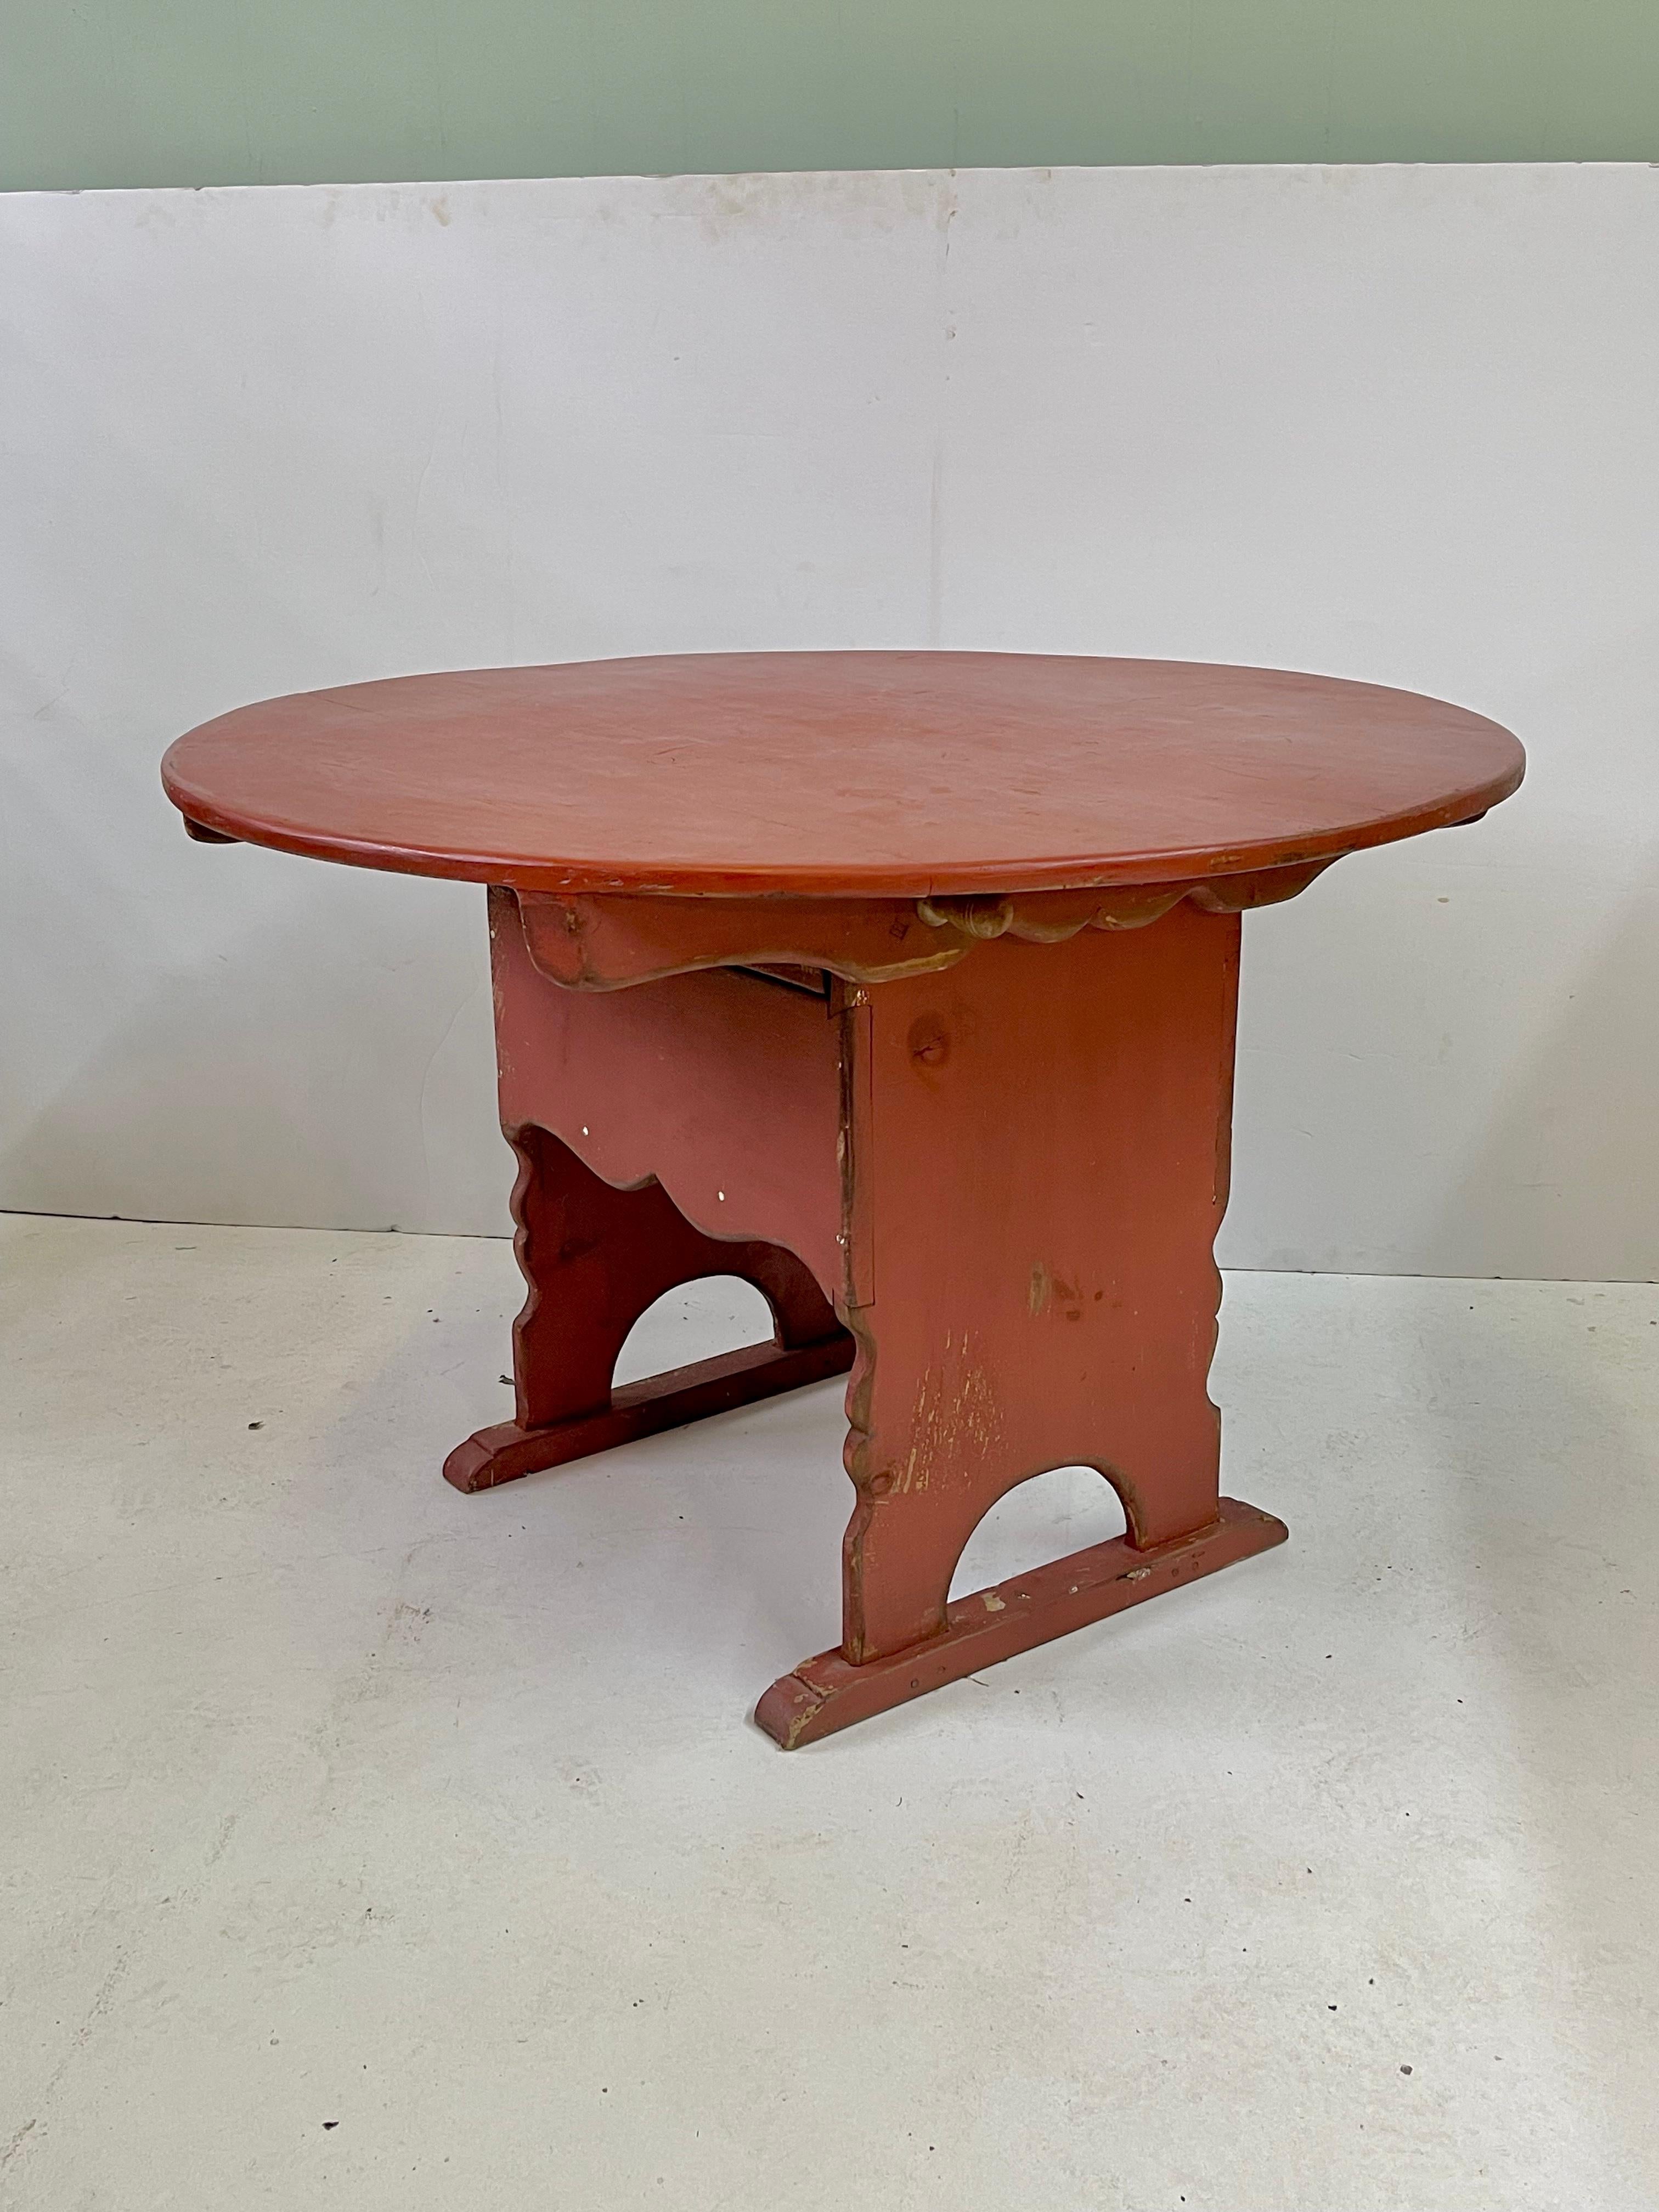 19th Century Provencal French wine tasting table of painted pine on a scalloped trestle base. The tilt top can be opened by releasing wooden dowels to convert the table into a chair with storage in the seat. The table features the original red paint